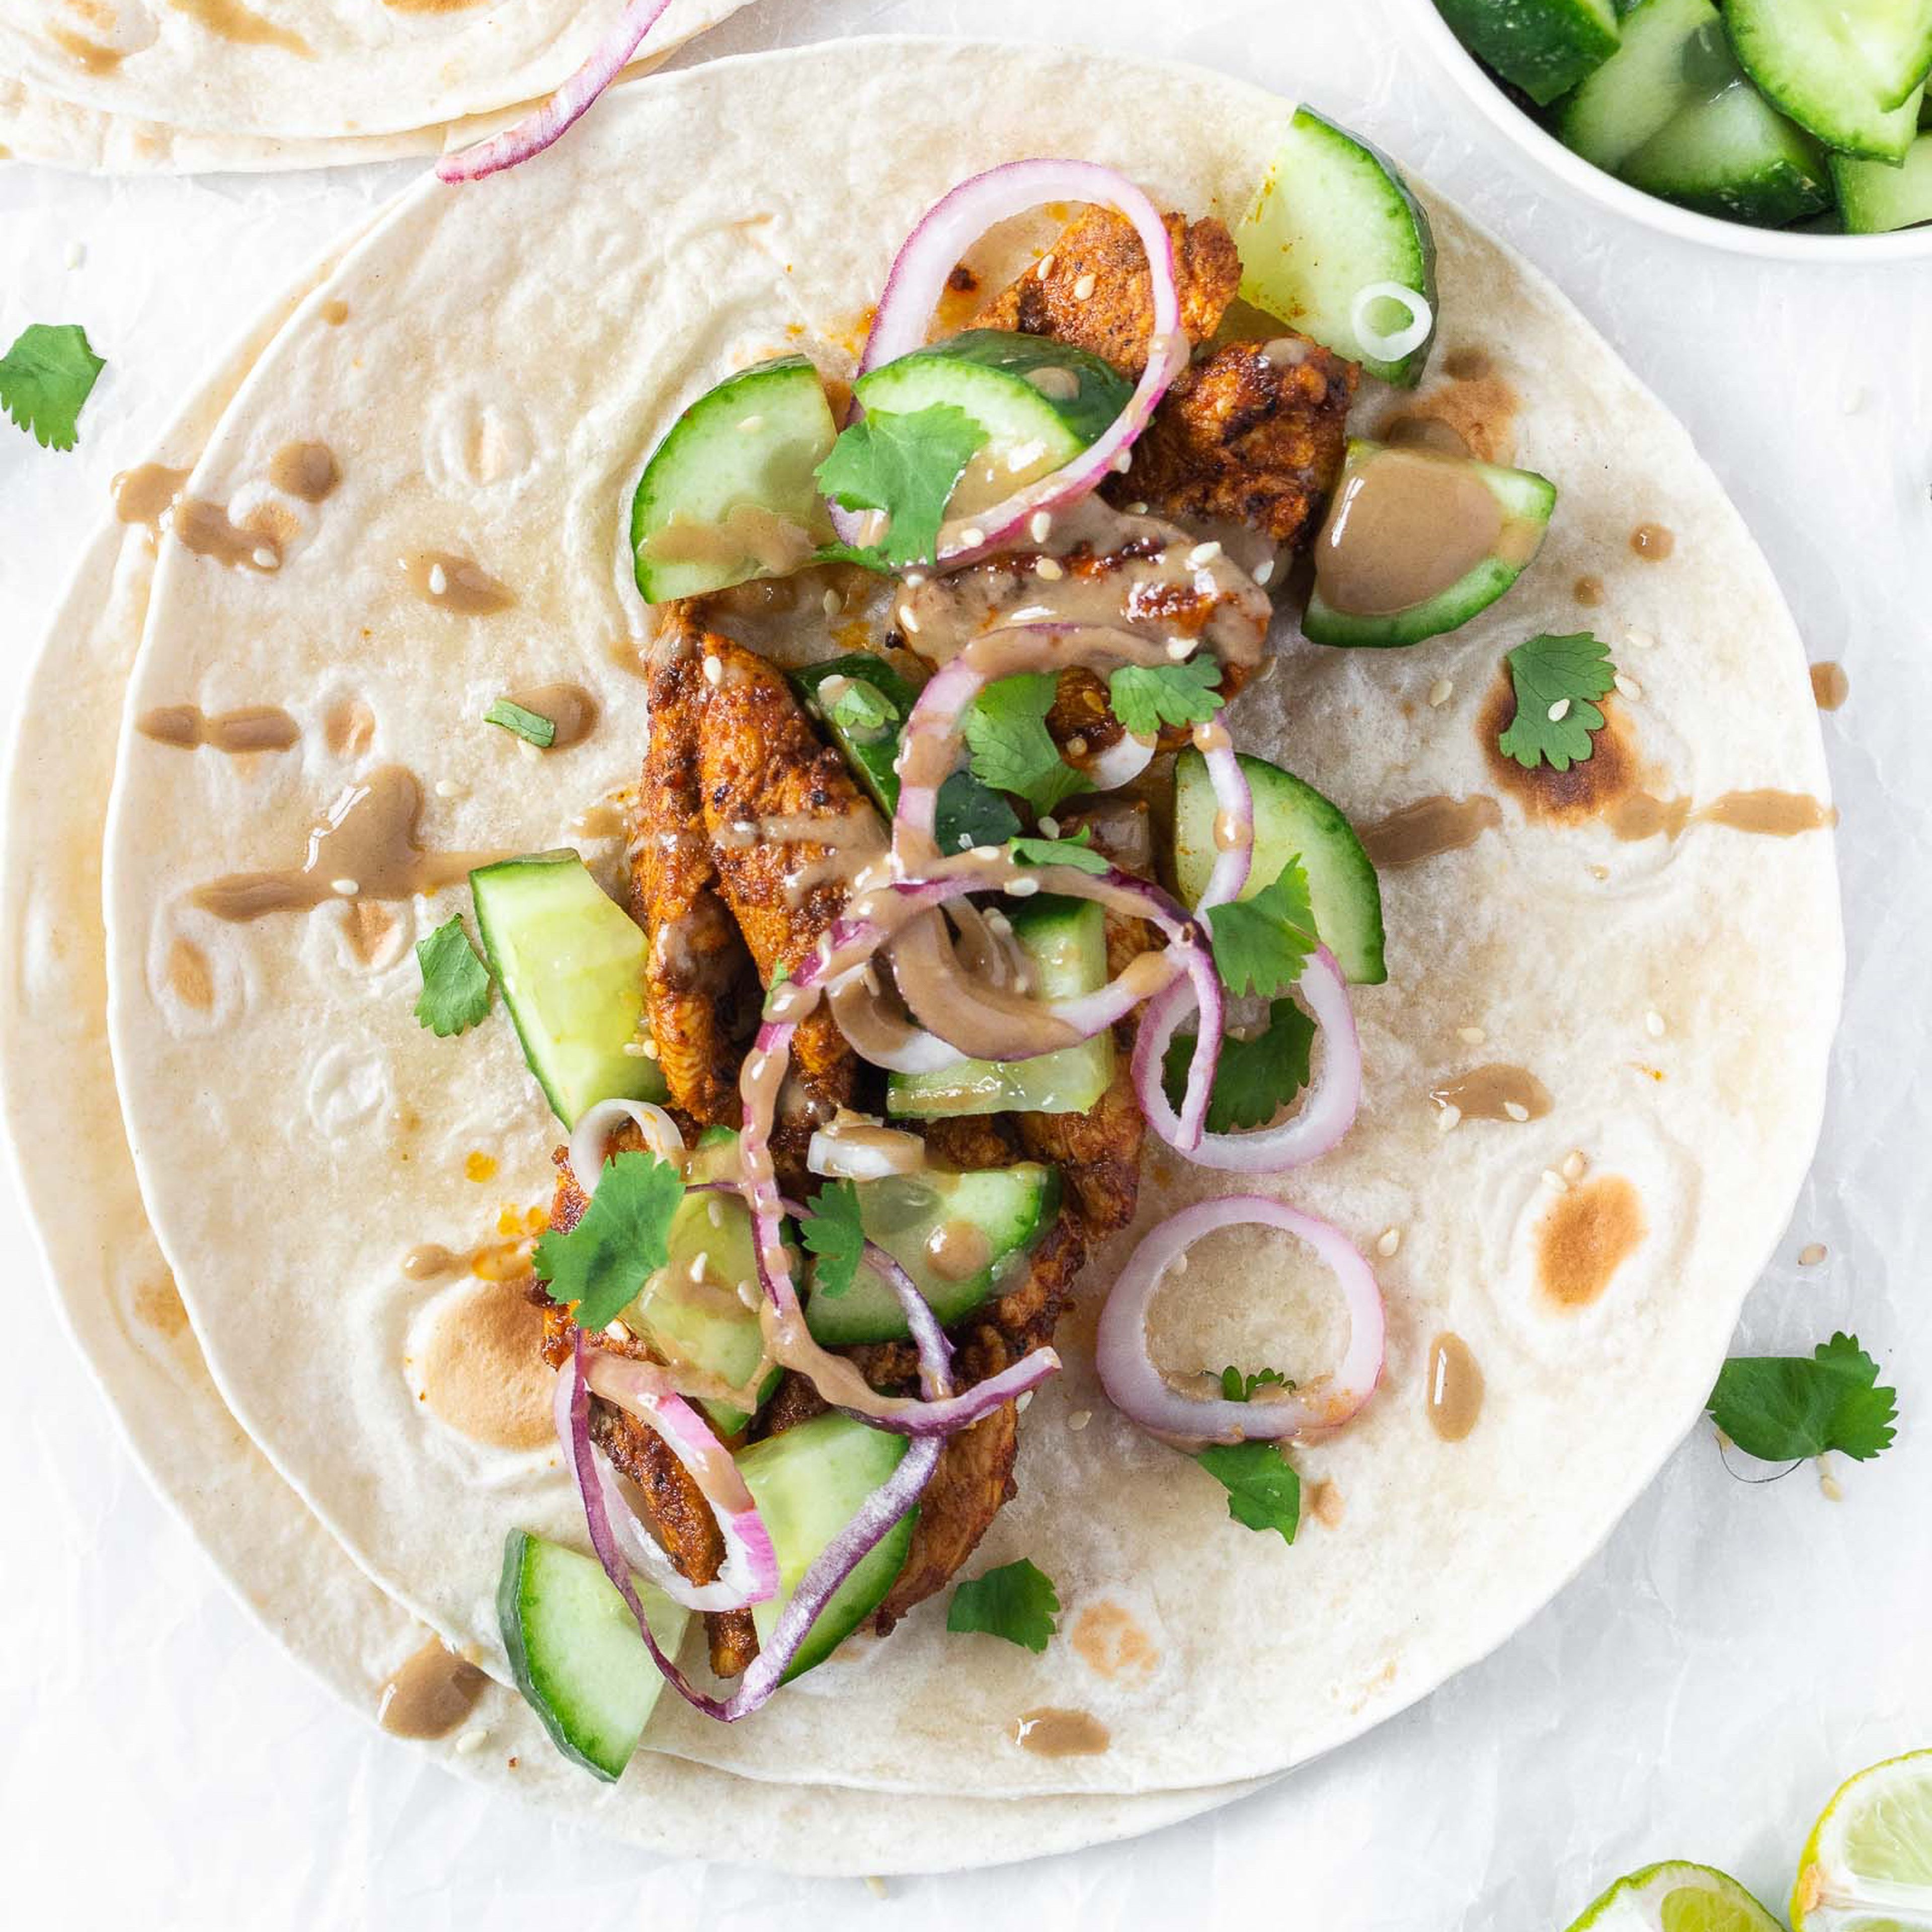 Assemble tortilla wraps with chicken and toppings, roll up and enjoy!